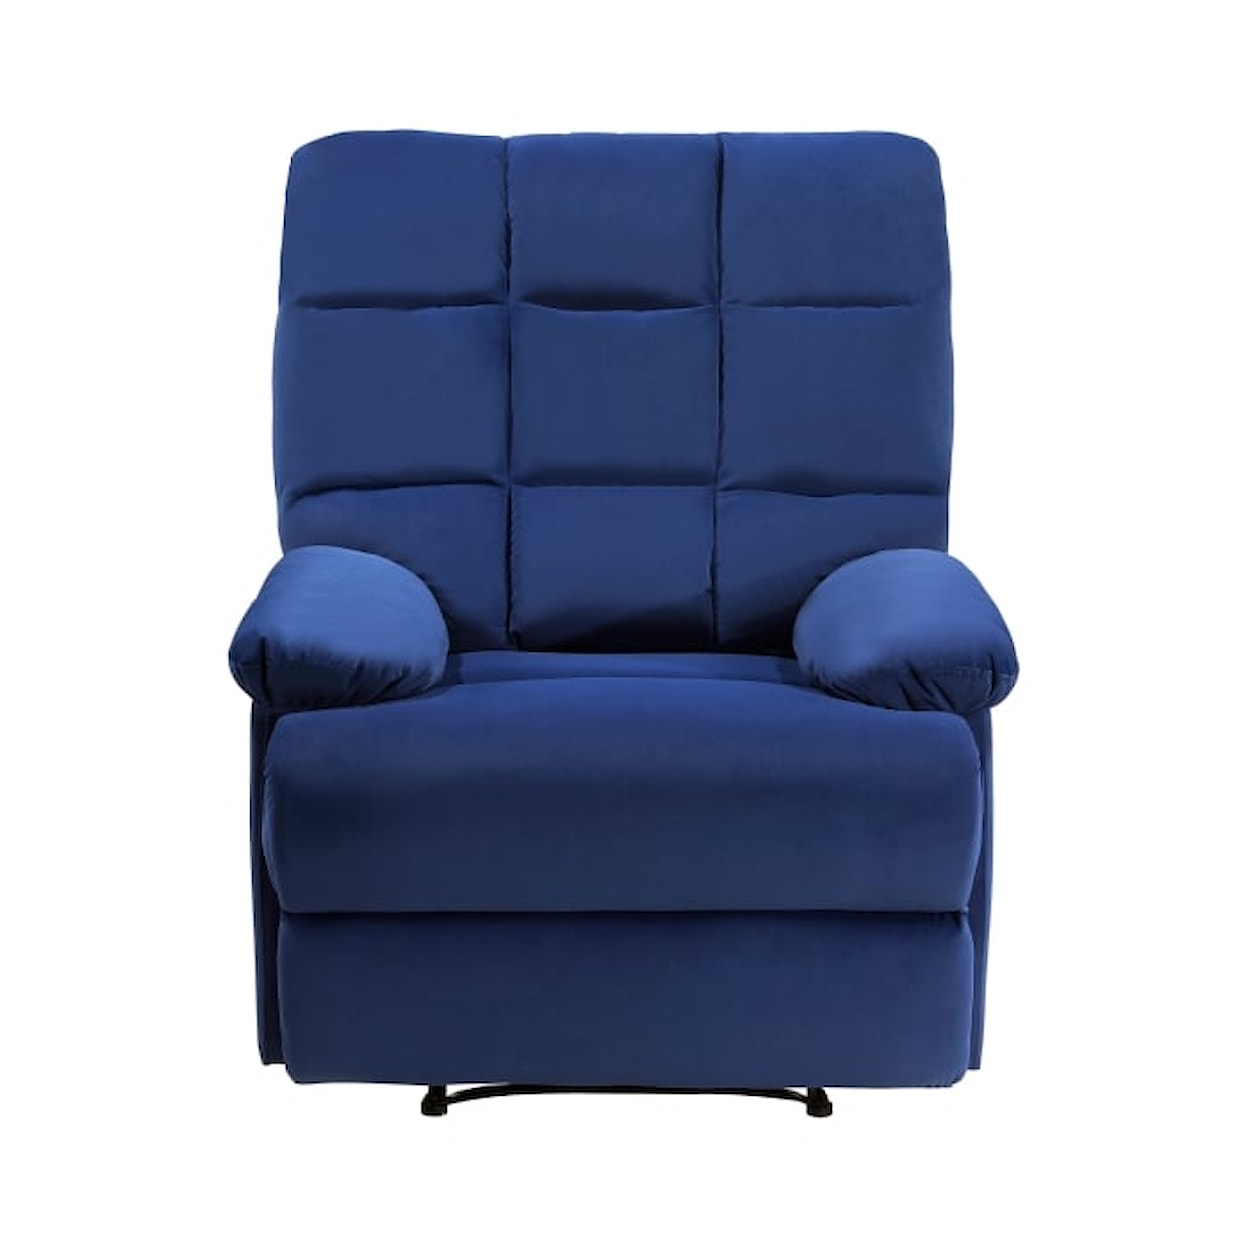 Homelegance Colin Reclining Chair